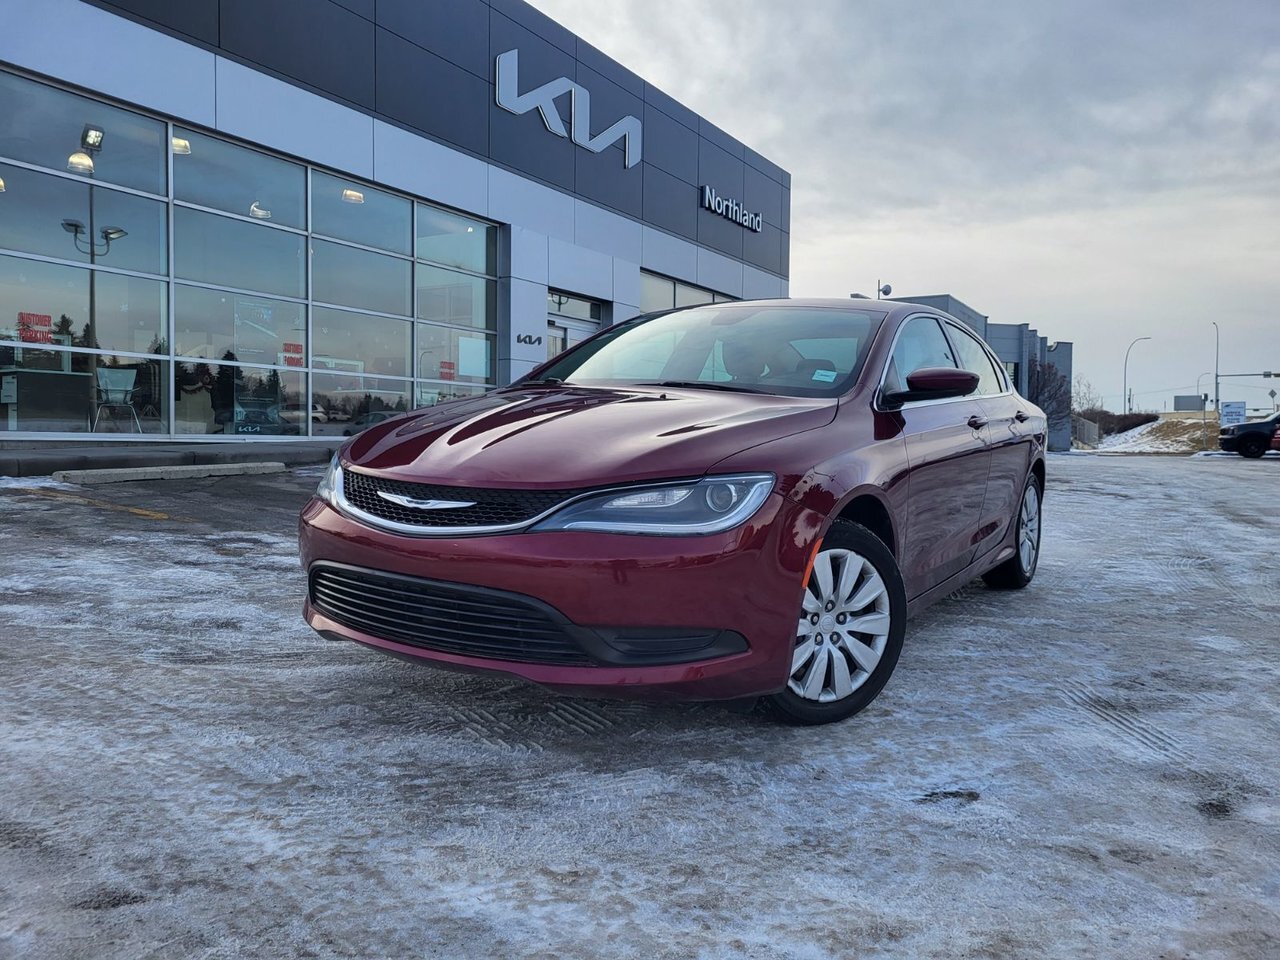 2016 Chrysler 200 LX GREAT VALUE! LOW MILEAGE, NO ACCIDENTS